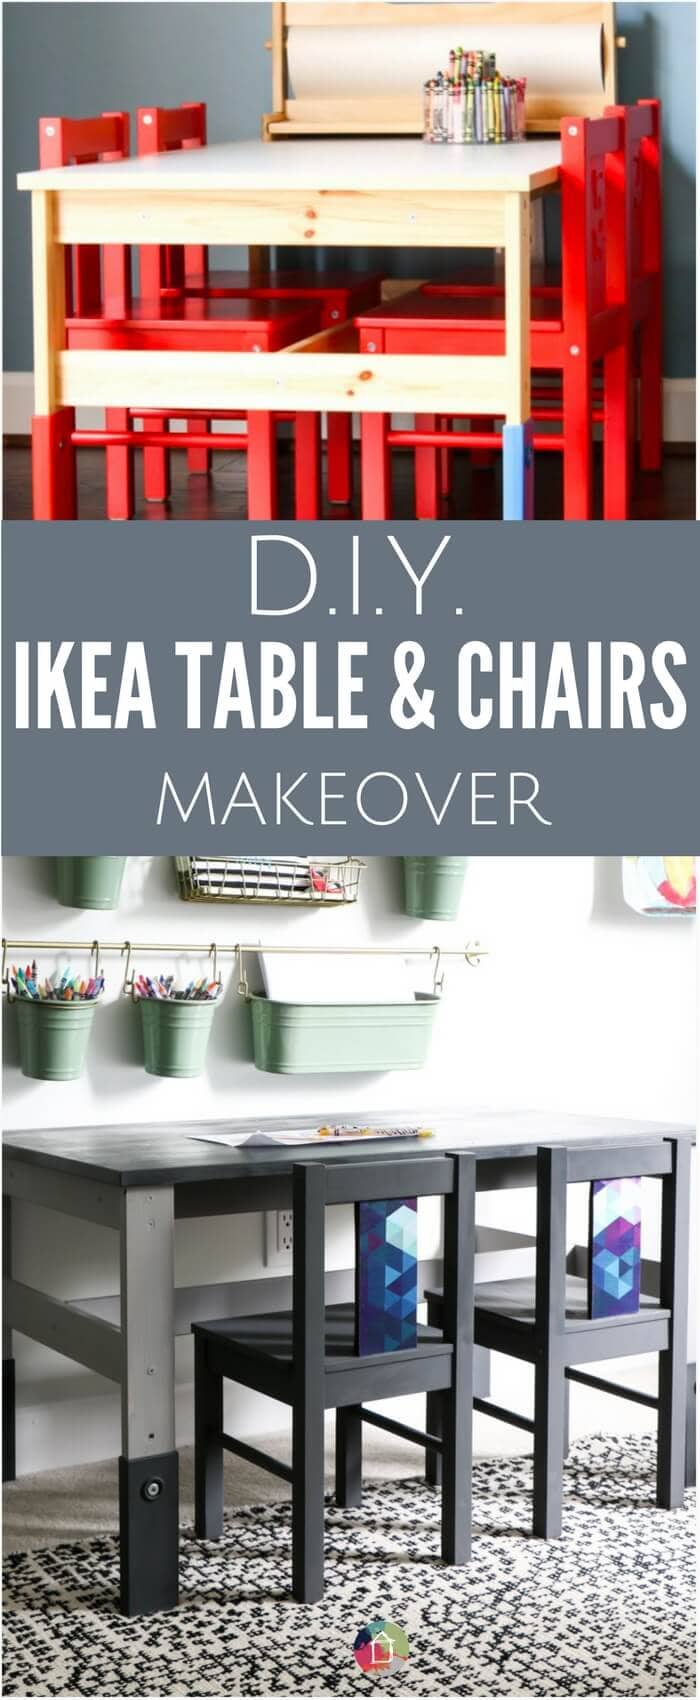 This cheap Ikea Kids' Table Looks Like It Came From a High-End Boutique. An Ikea kid's table and chairs can look super stylish with just a little bit of work. This Ikea kid's table and chairs makeover is so easy and gorgeous! Click for the full tutorial with step-by-step photos.